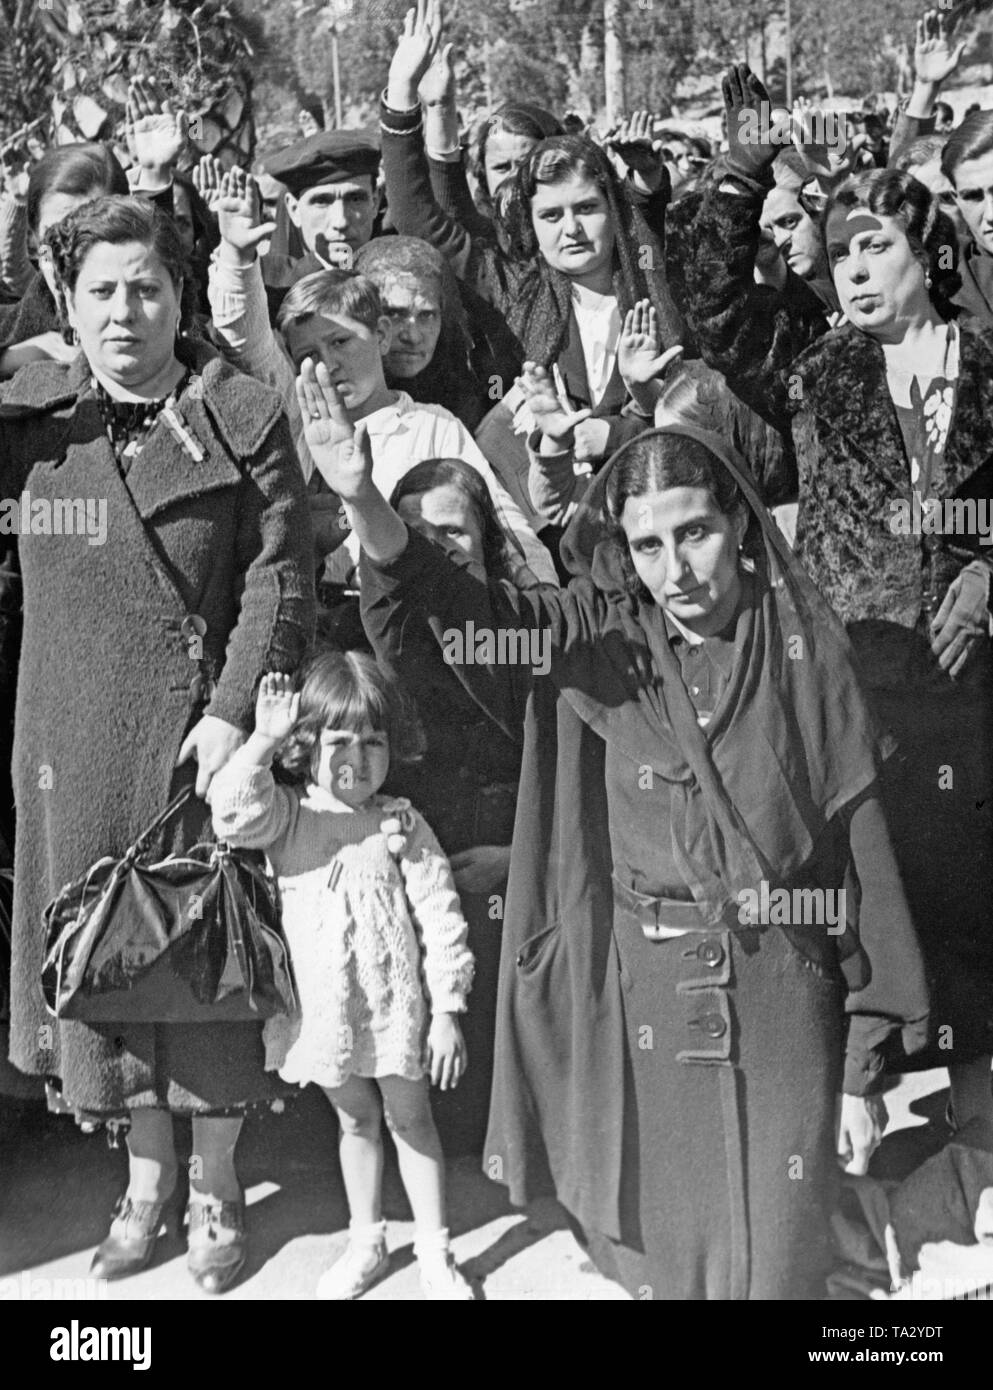 Women and children give the Fascist salute to the invading Spanish national units in Malaga, Andalusia, Spain, in 1936. Some women wear red-yellow-red ribbons on the chest. Stock Photo